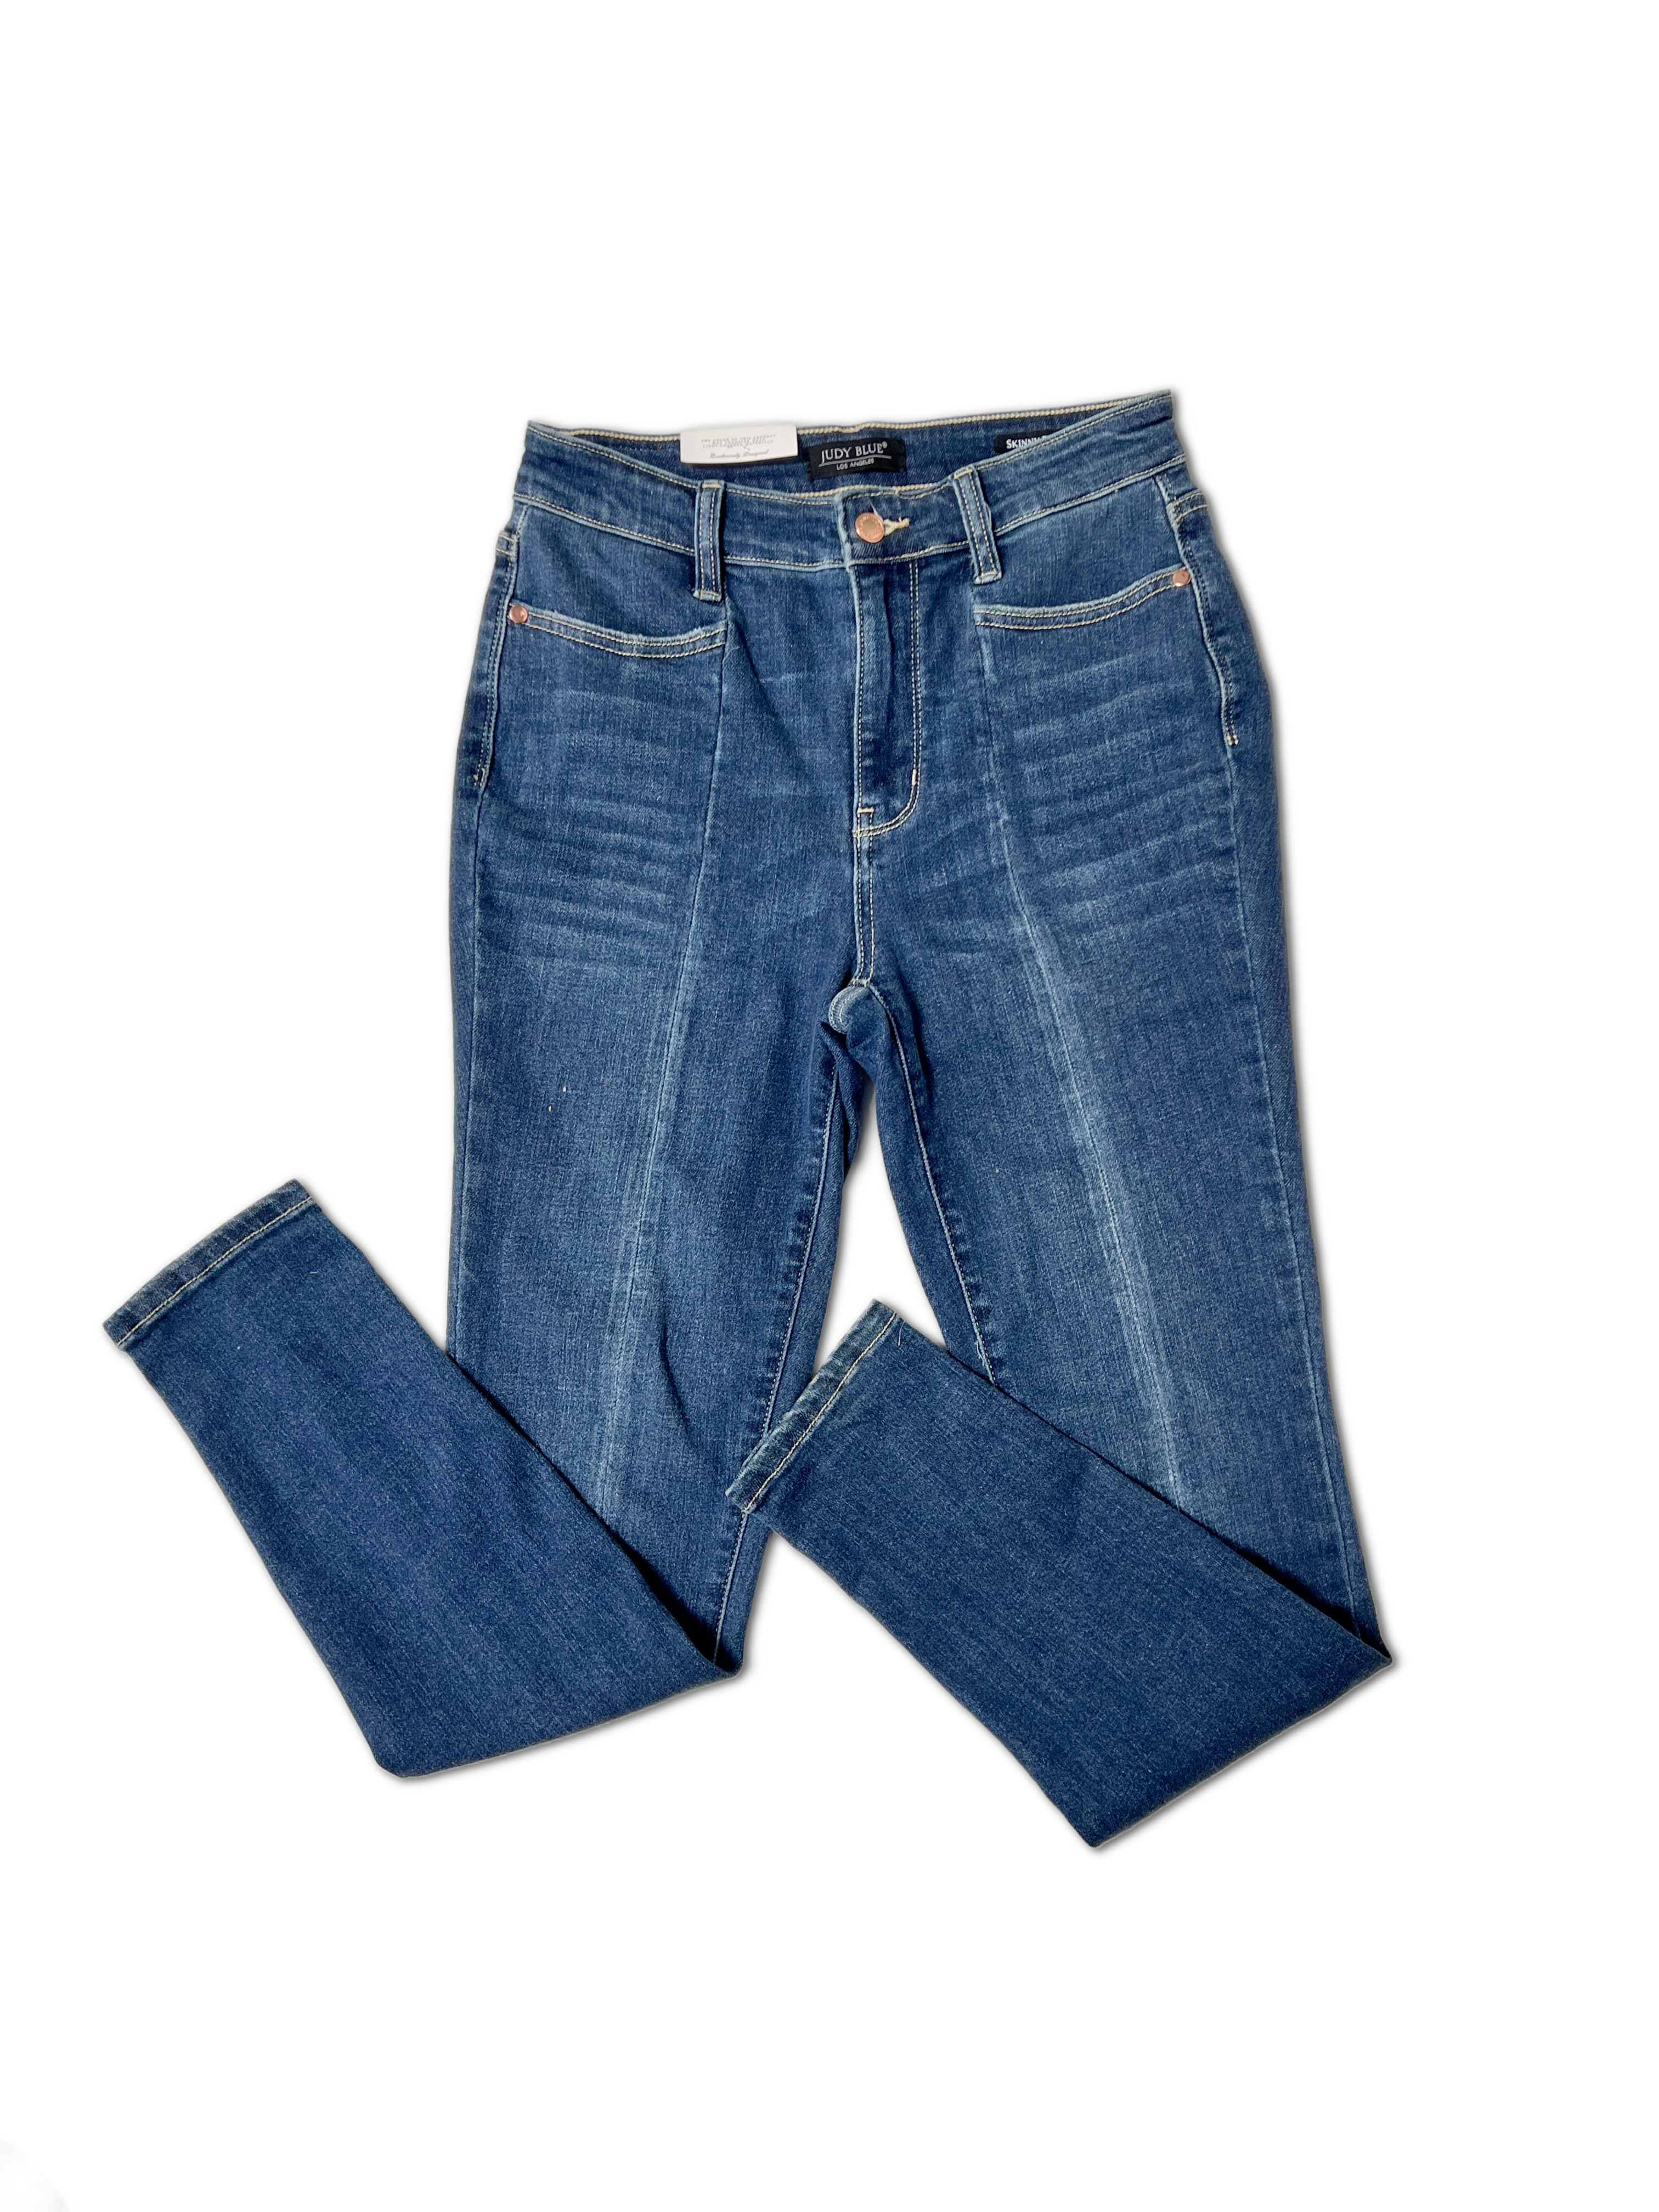 Wear Religiously - Judy Blue Skinnies Boutique Simplified